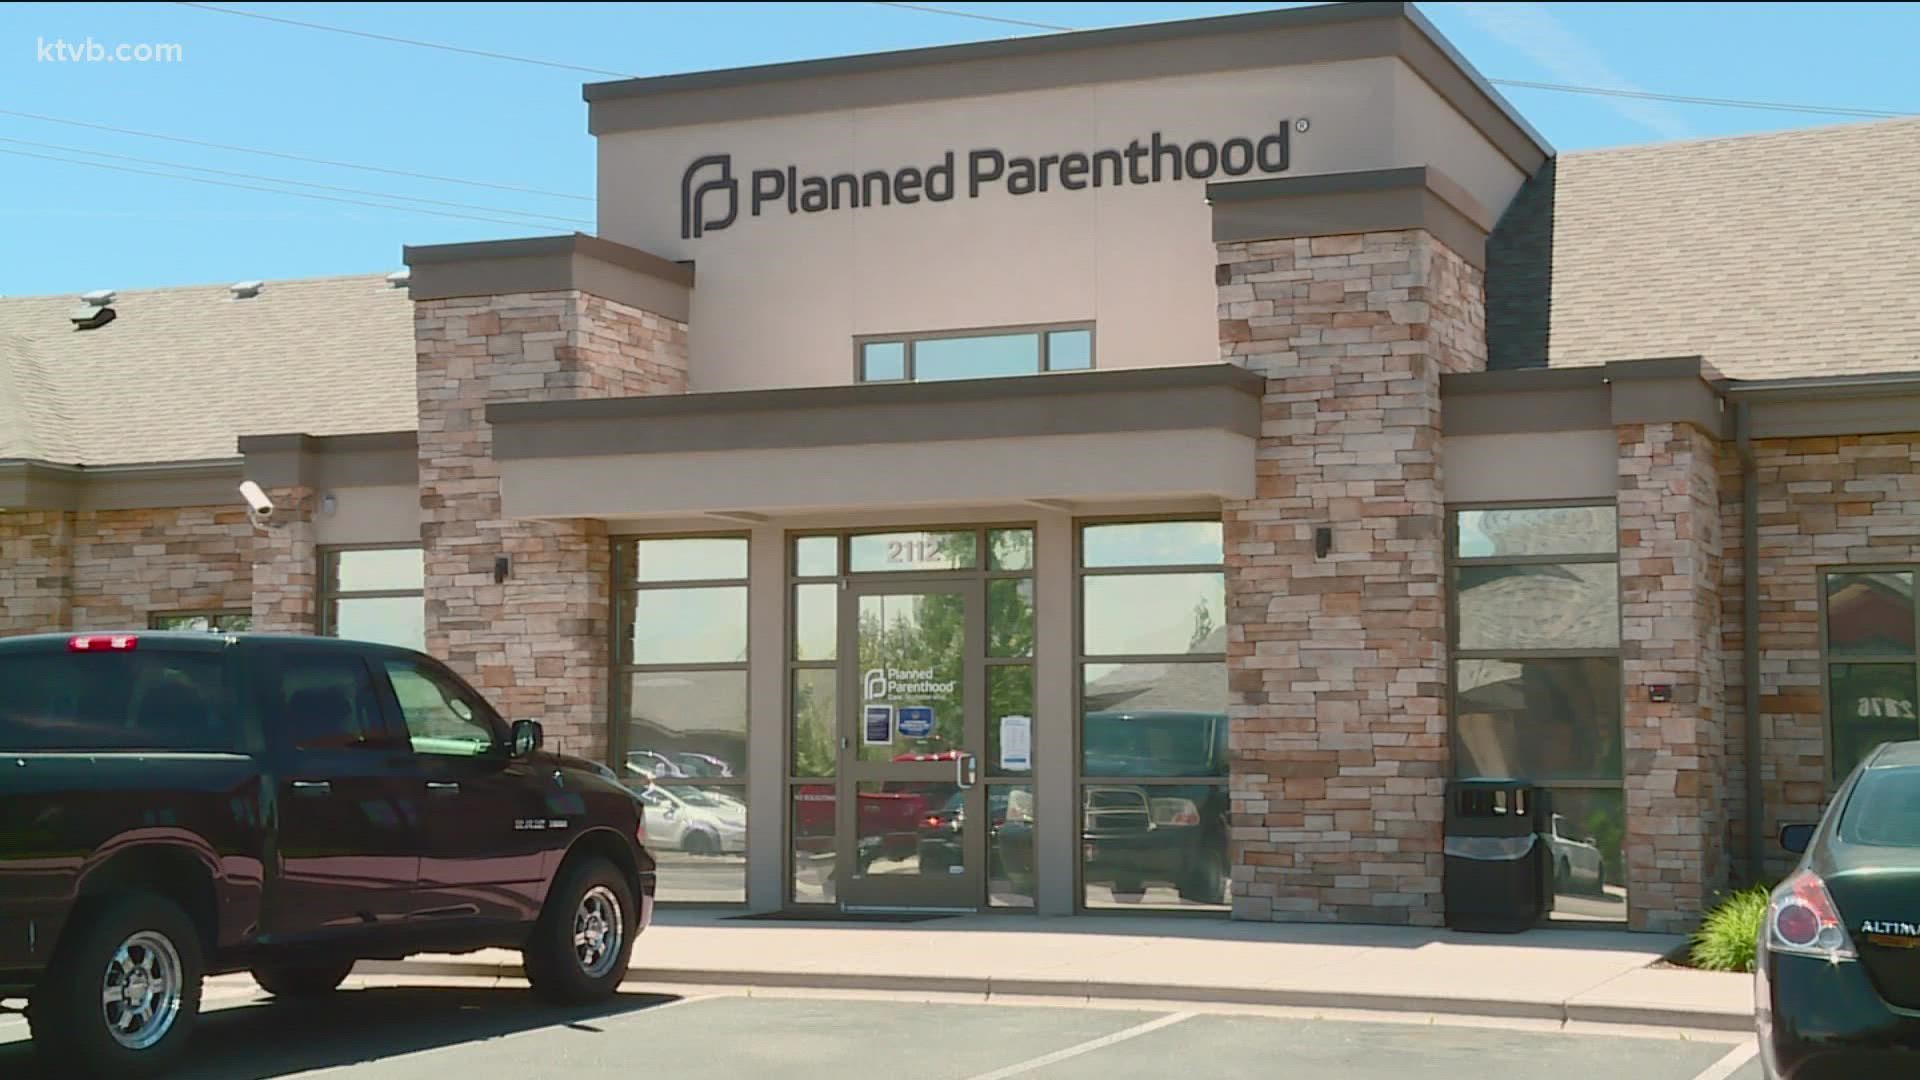 With the doors closed at Planned Parenthood's Boise location, the organization is down to only two facilities in Idaho - Meridian and Twin Falls.